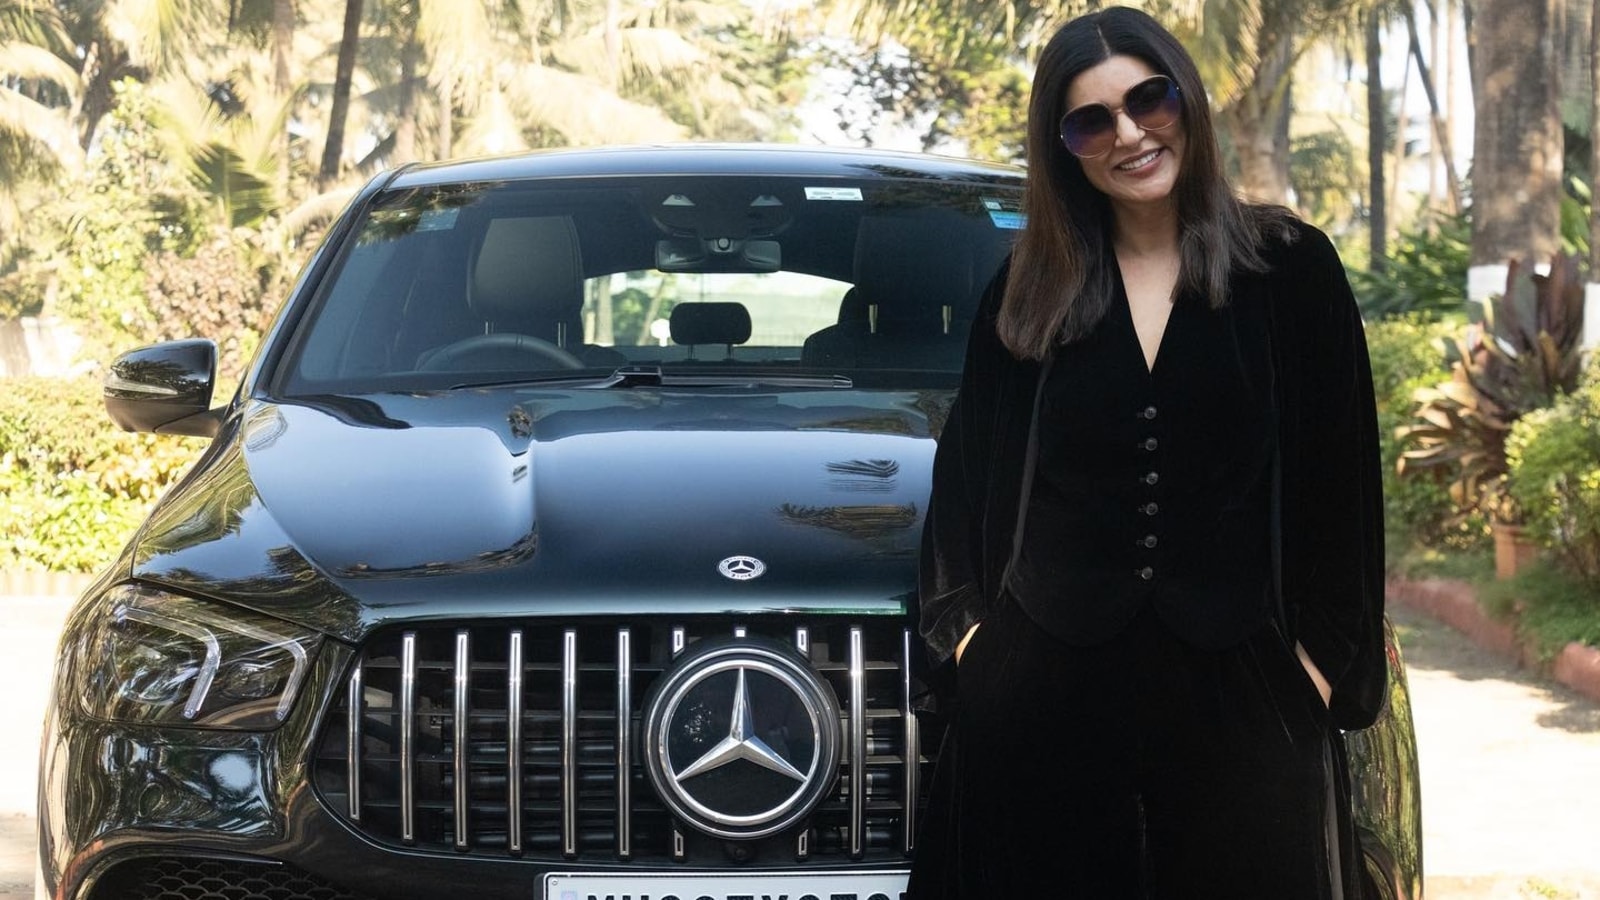 Sushmita Sen gifts herself Mercedes car worth ₹1.92 crore, poses with her ‘beast’. Watch